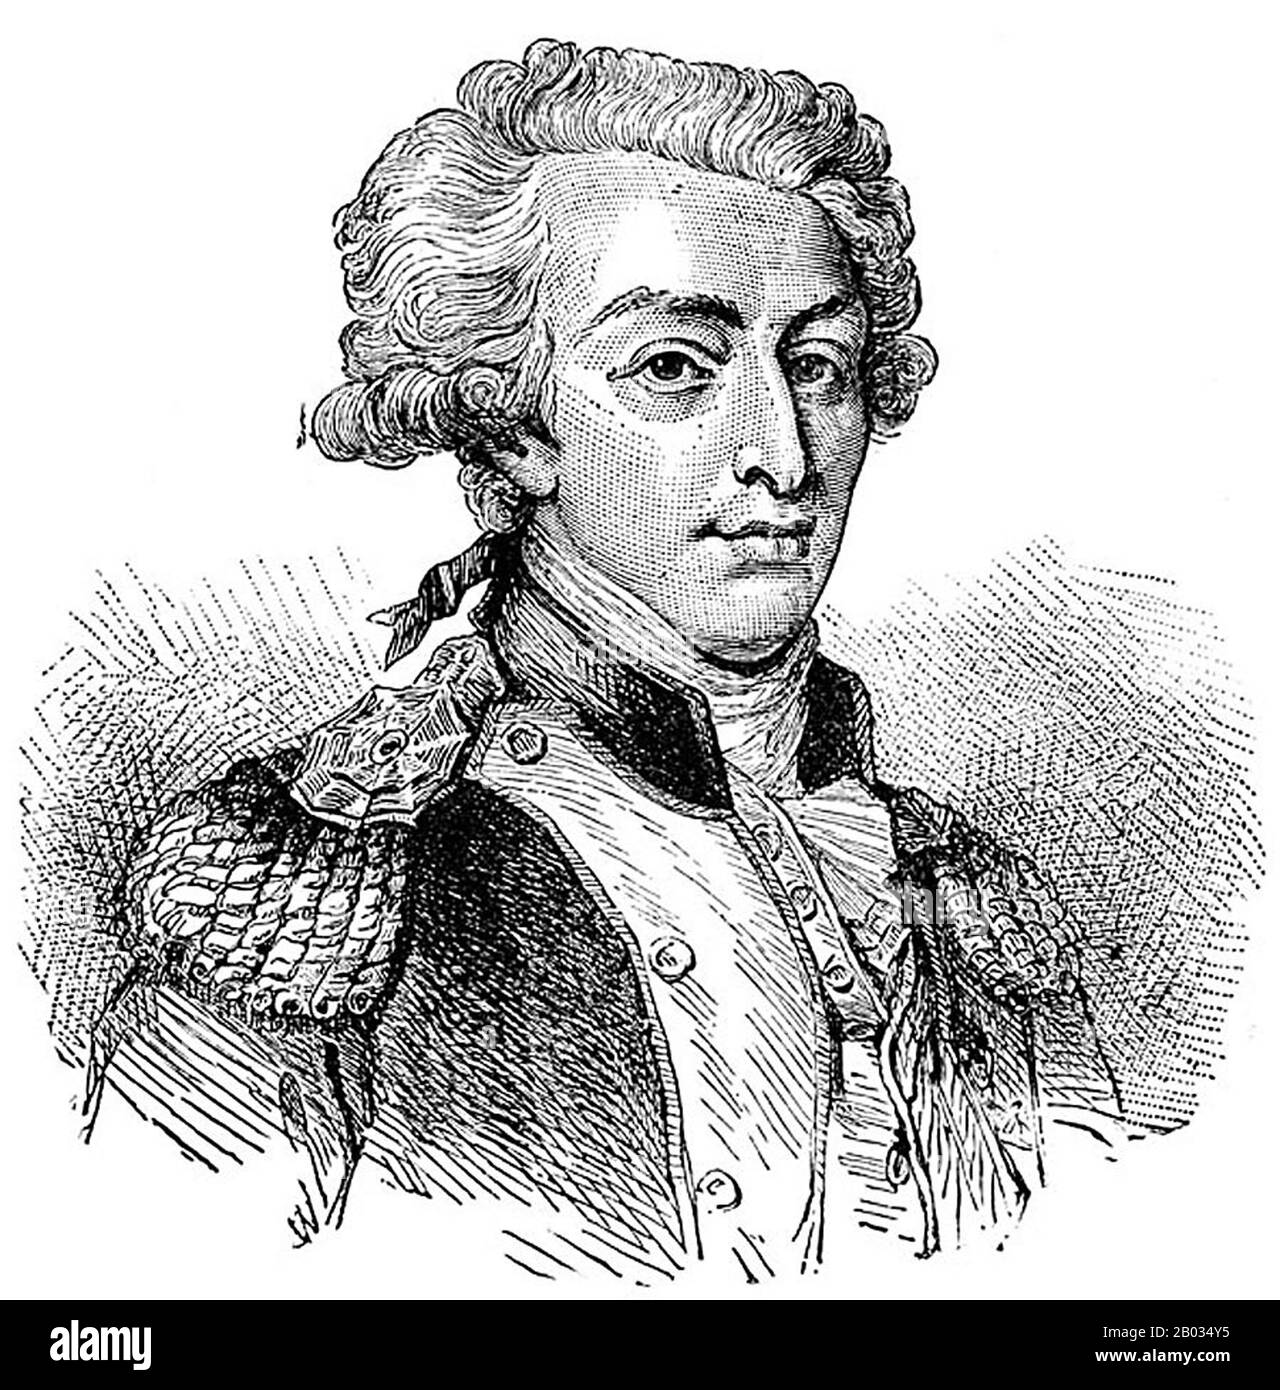 Marie-Joseph Paul Yves Roch Gilbert du Motier, Marquis de Lafayette (6 September 1757 – 20 May 1834), in the U.S. often known simply as Lafayette, was a French aristocrat and military officer who fought in the American Revolutionary War.  A close friend of George Washington, Alexander Hamilton, and Thomas Jefferson, Lafayette was a key figure in the French Revolution of 1789 and the July Revolution of 1830. Stock Photo